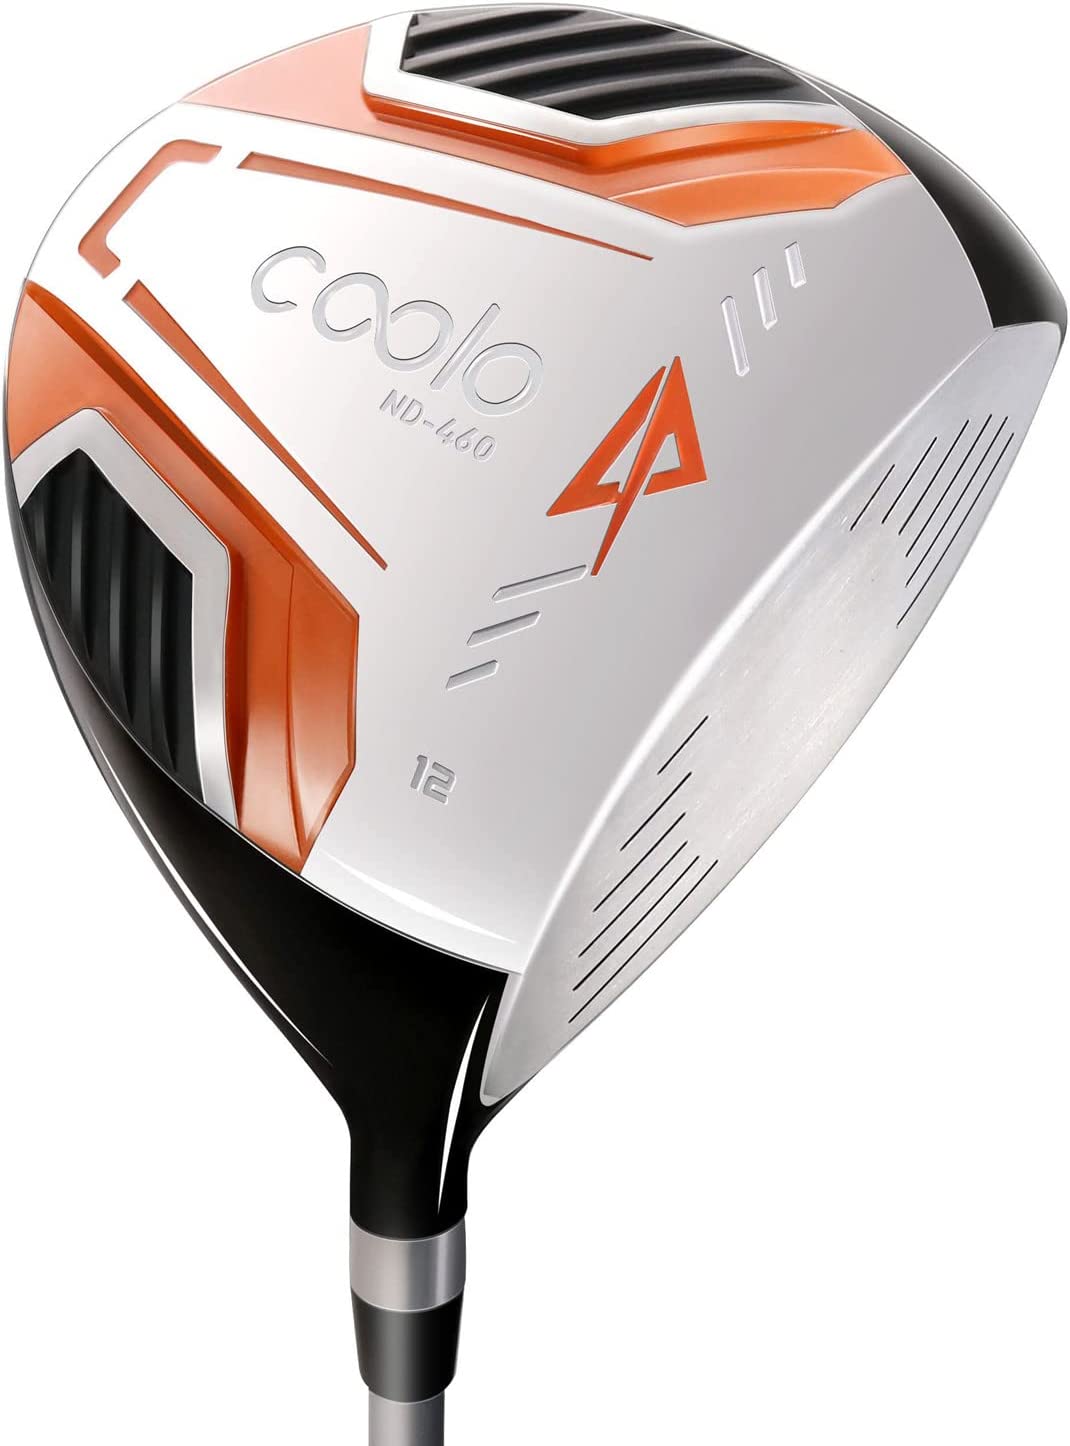 COOLO Golf Driver